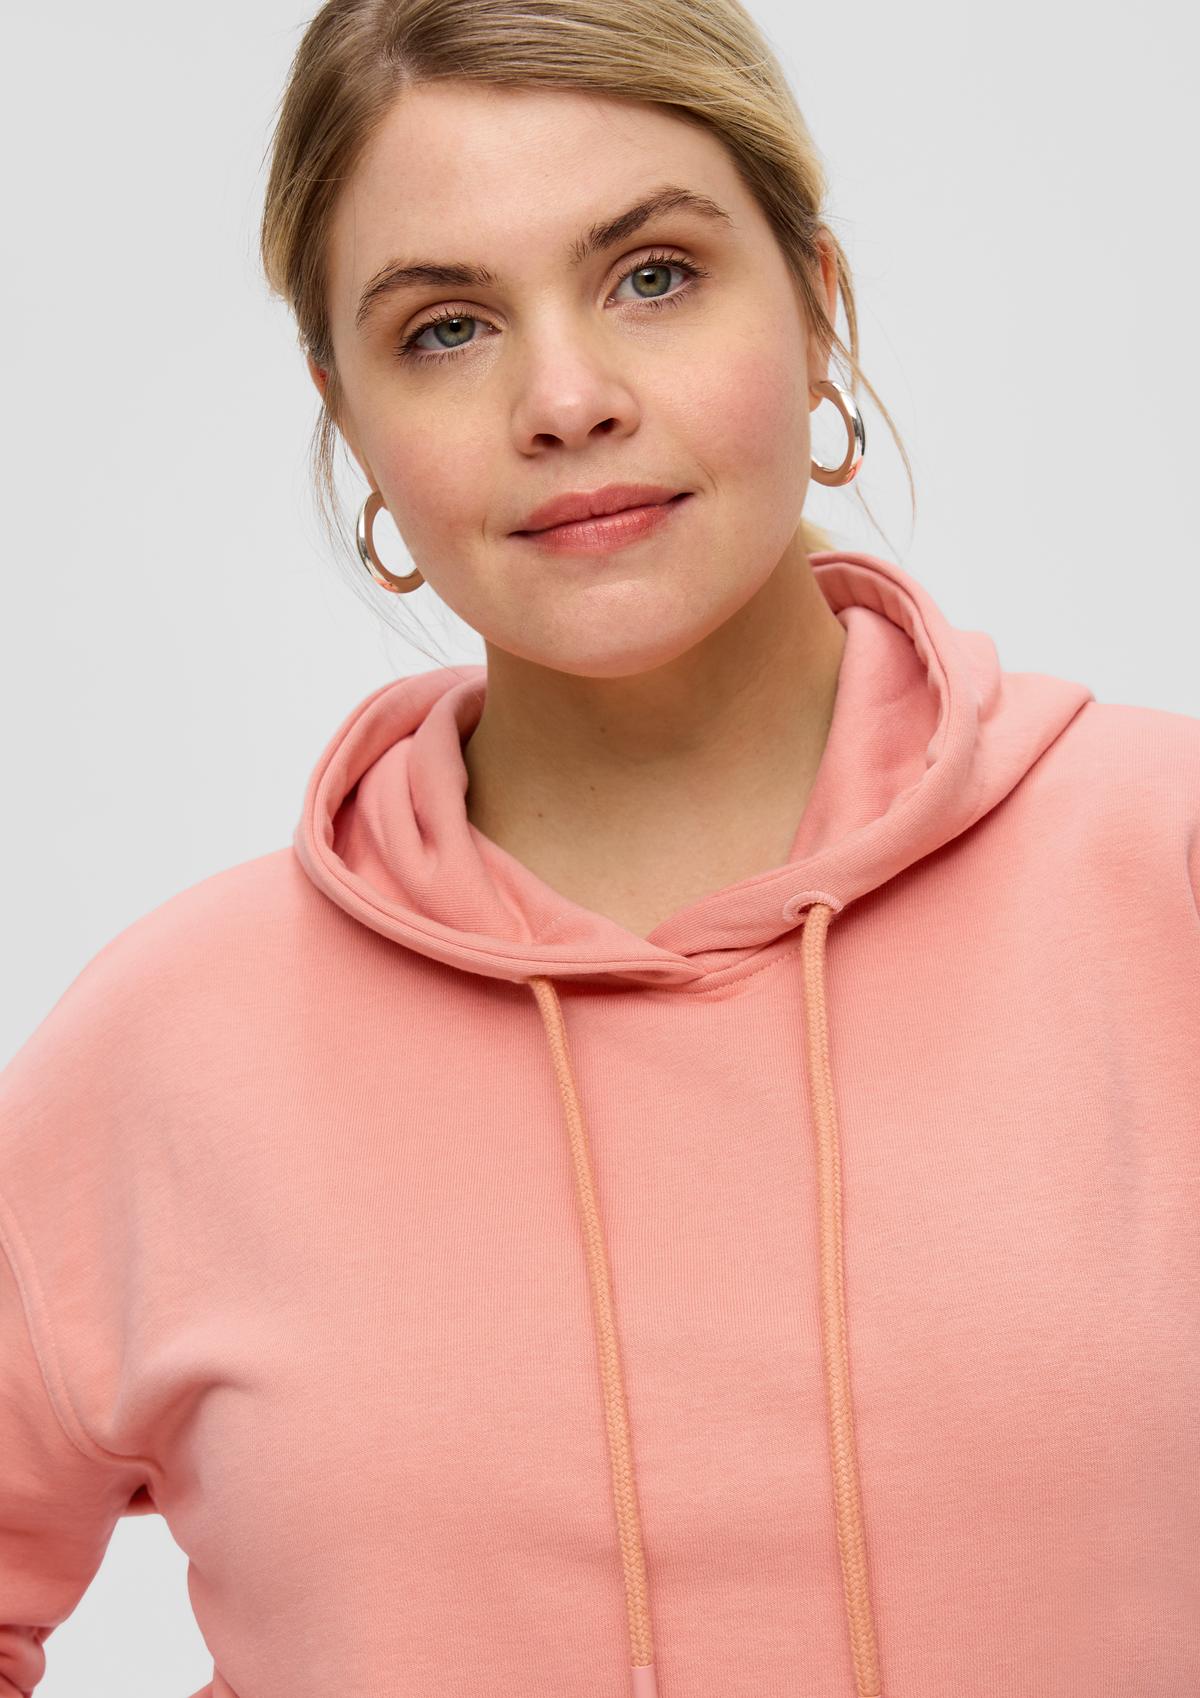 s.Oliver Hooded sweatshirt with dropped shoulders